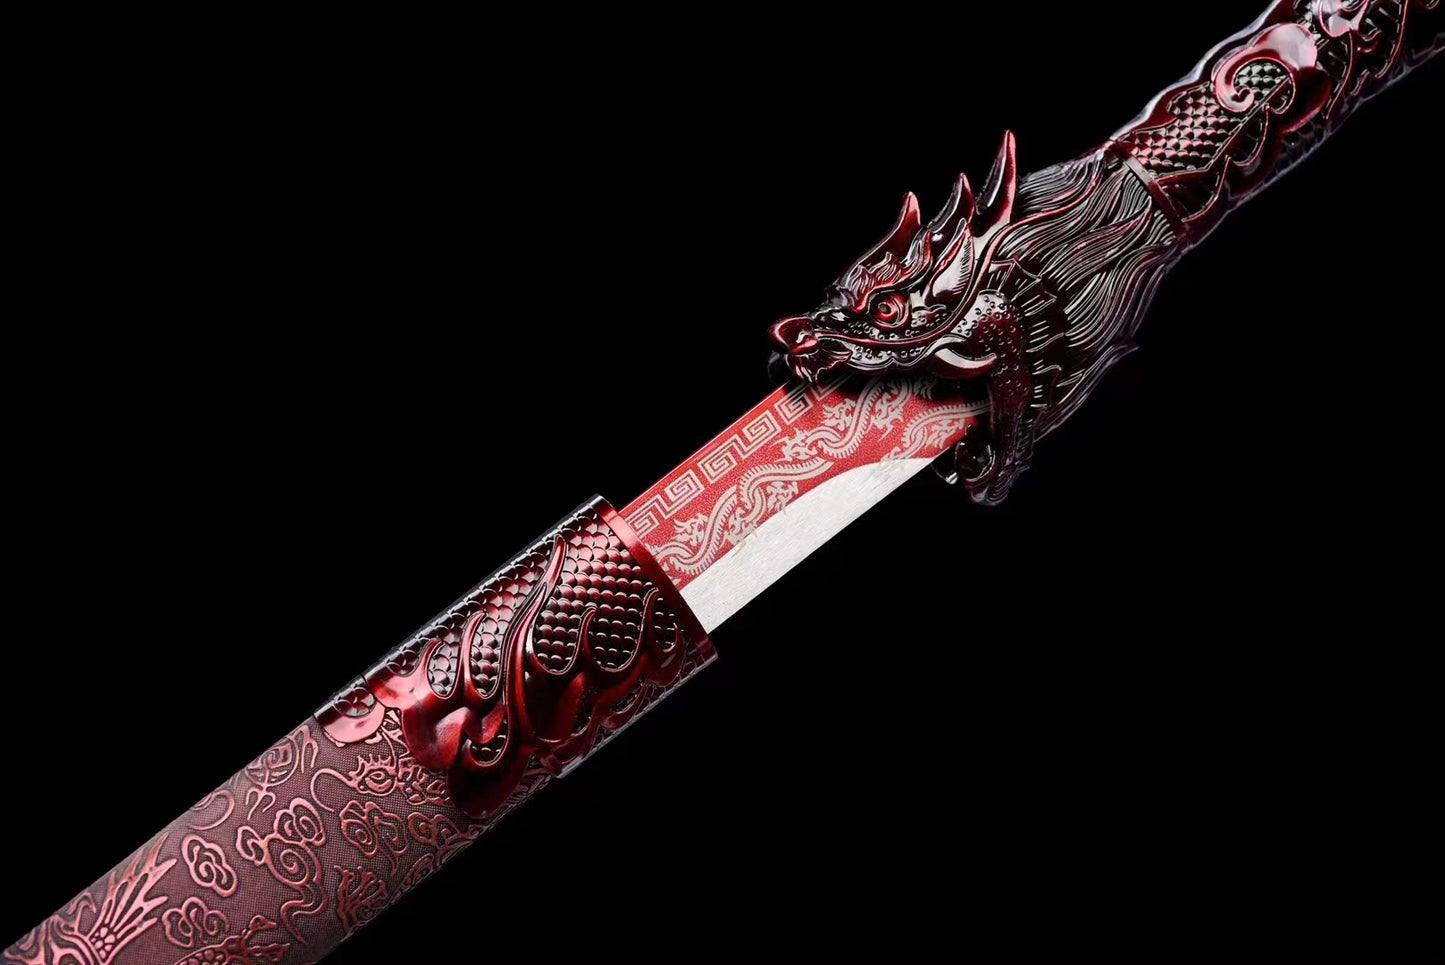 blood dragon（Baking paint and engraving process）